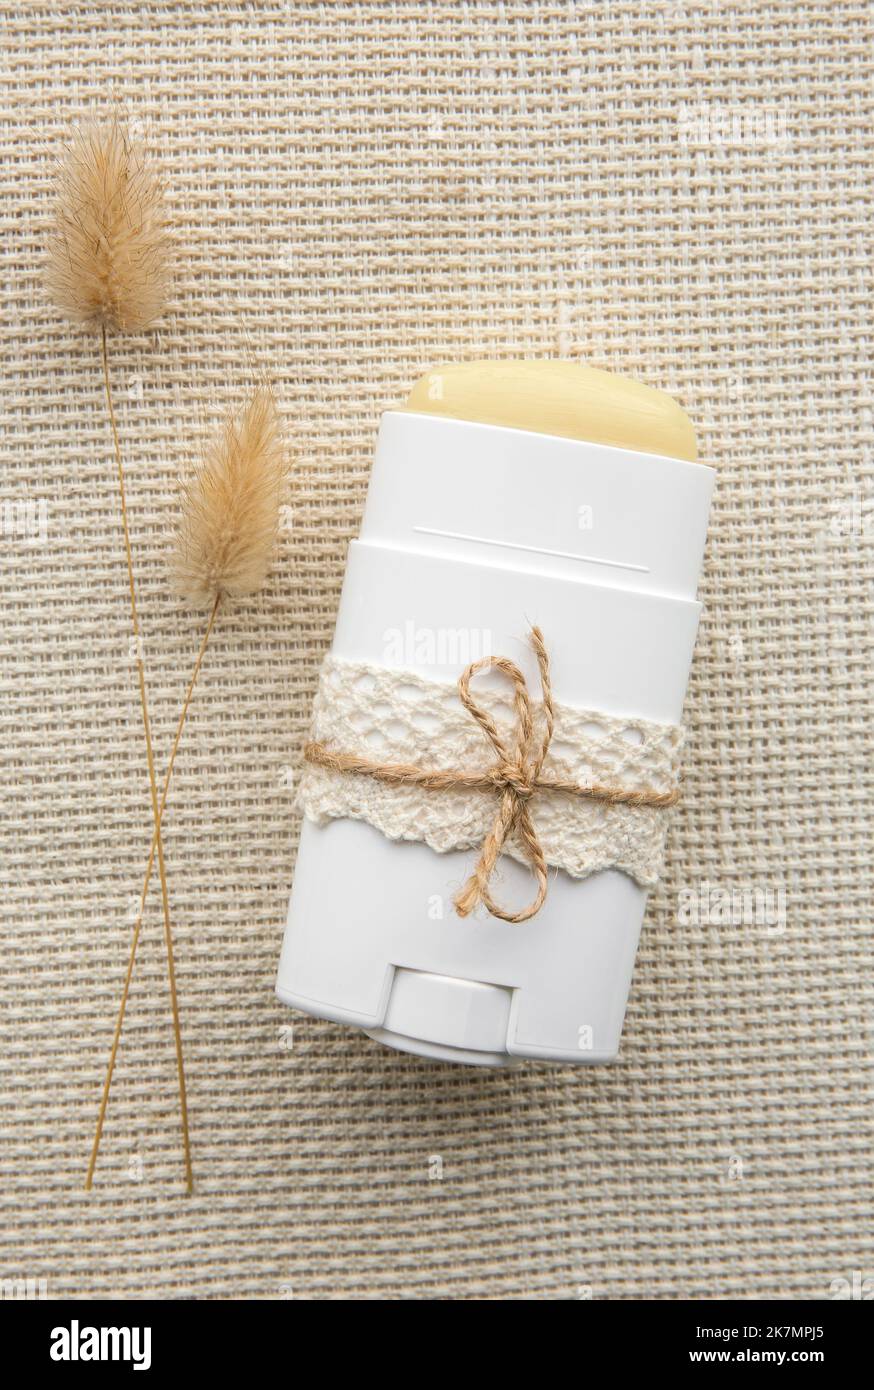 Homemade deodorant stick with all natural ingredients concept. Flat lay view of refill container with natural antiperspirant on natural textile. Stock Photo